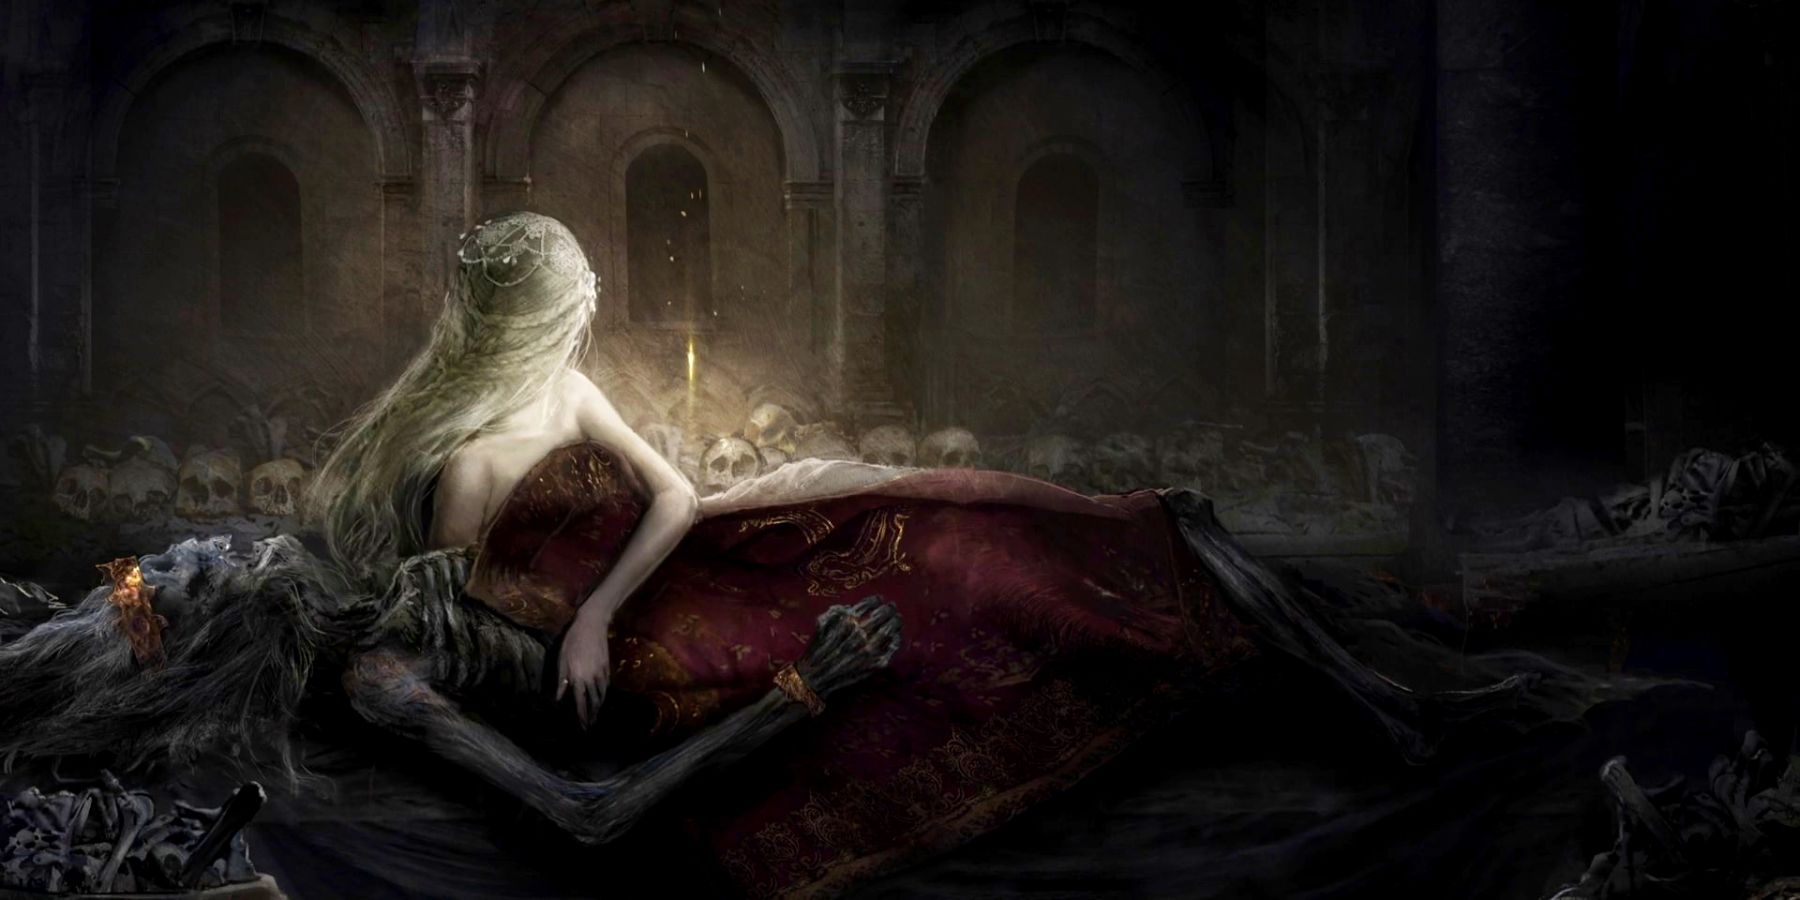 An image of Fia, Deathbed Companion from Elden Ring's opening cutscene, showing her laying next to a crowned corpse amid many other skulls.